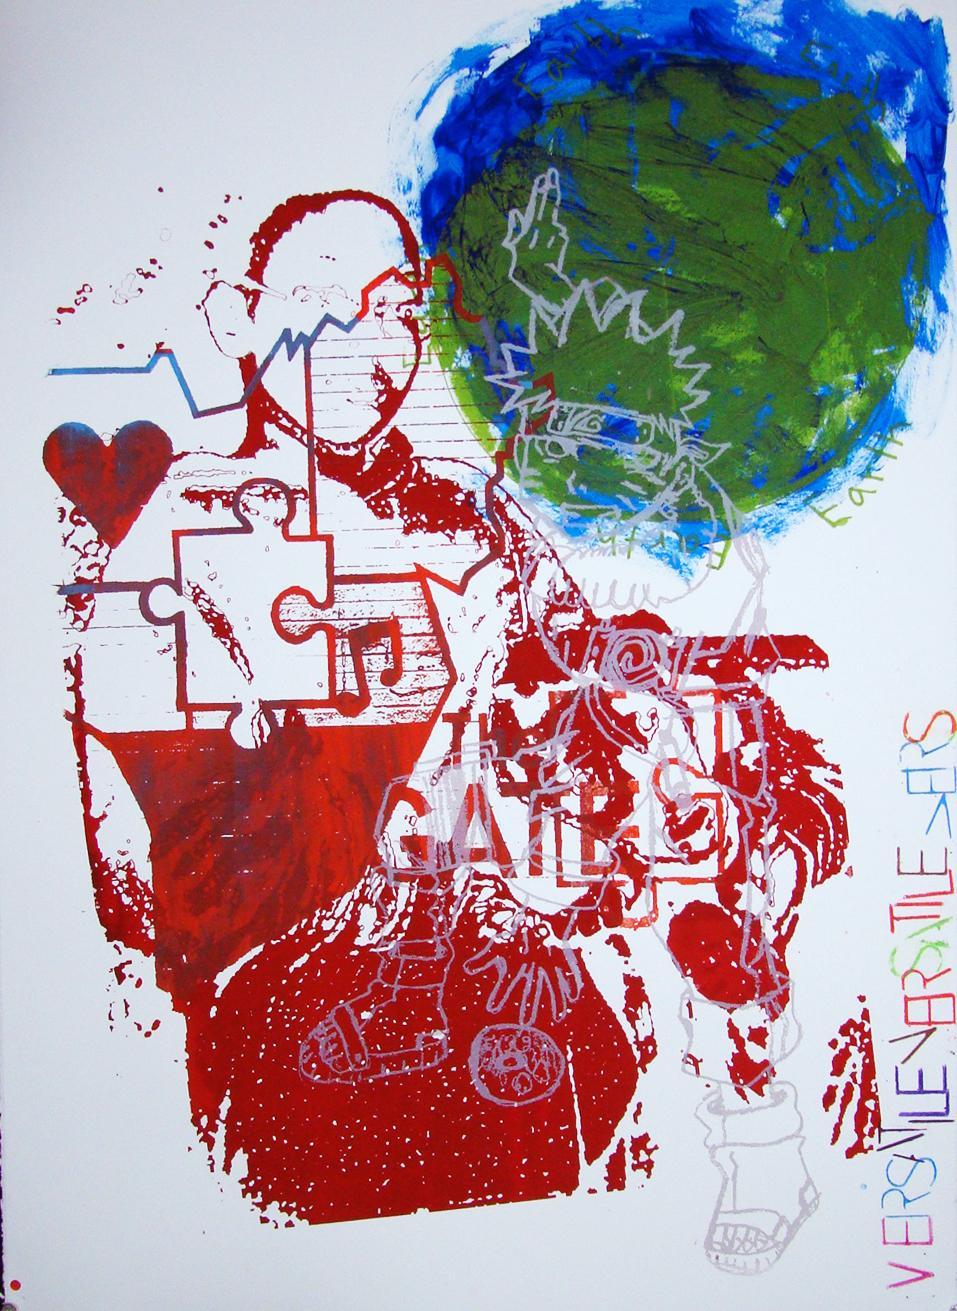 Tayler Morgan, Caleb Fisher, Officer Dennis Taylor and Anne Brennan. Puzzle Pieces, 2010, 30 x 22 crayon and screenprint on paper. Collection of The Gate.